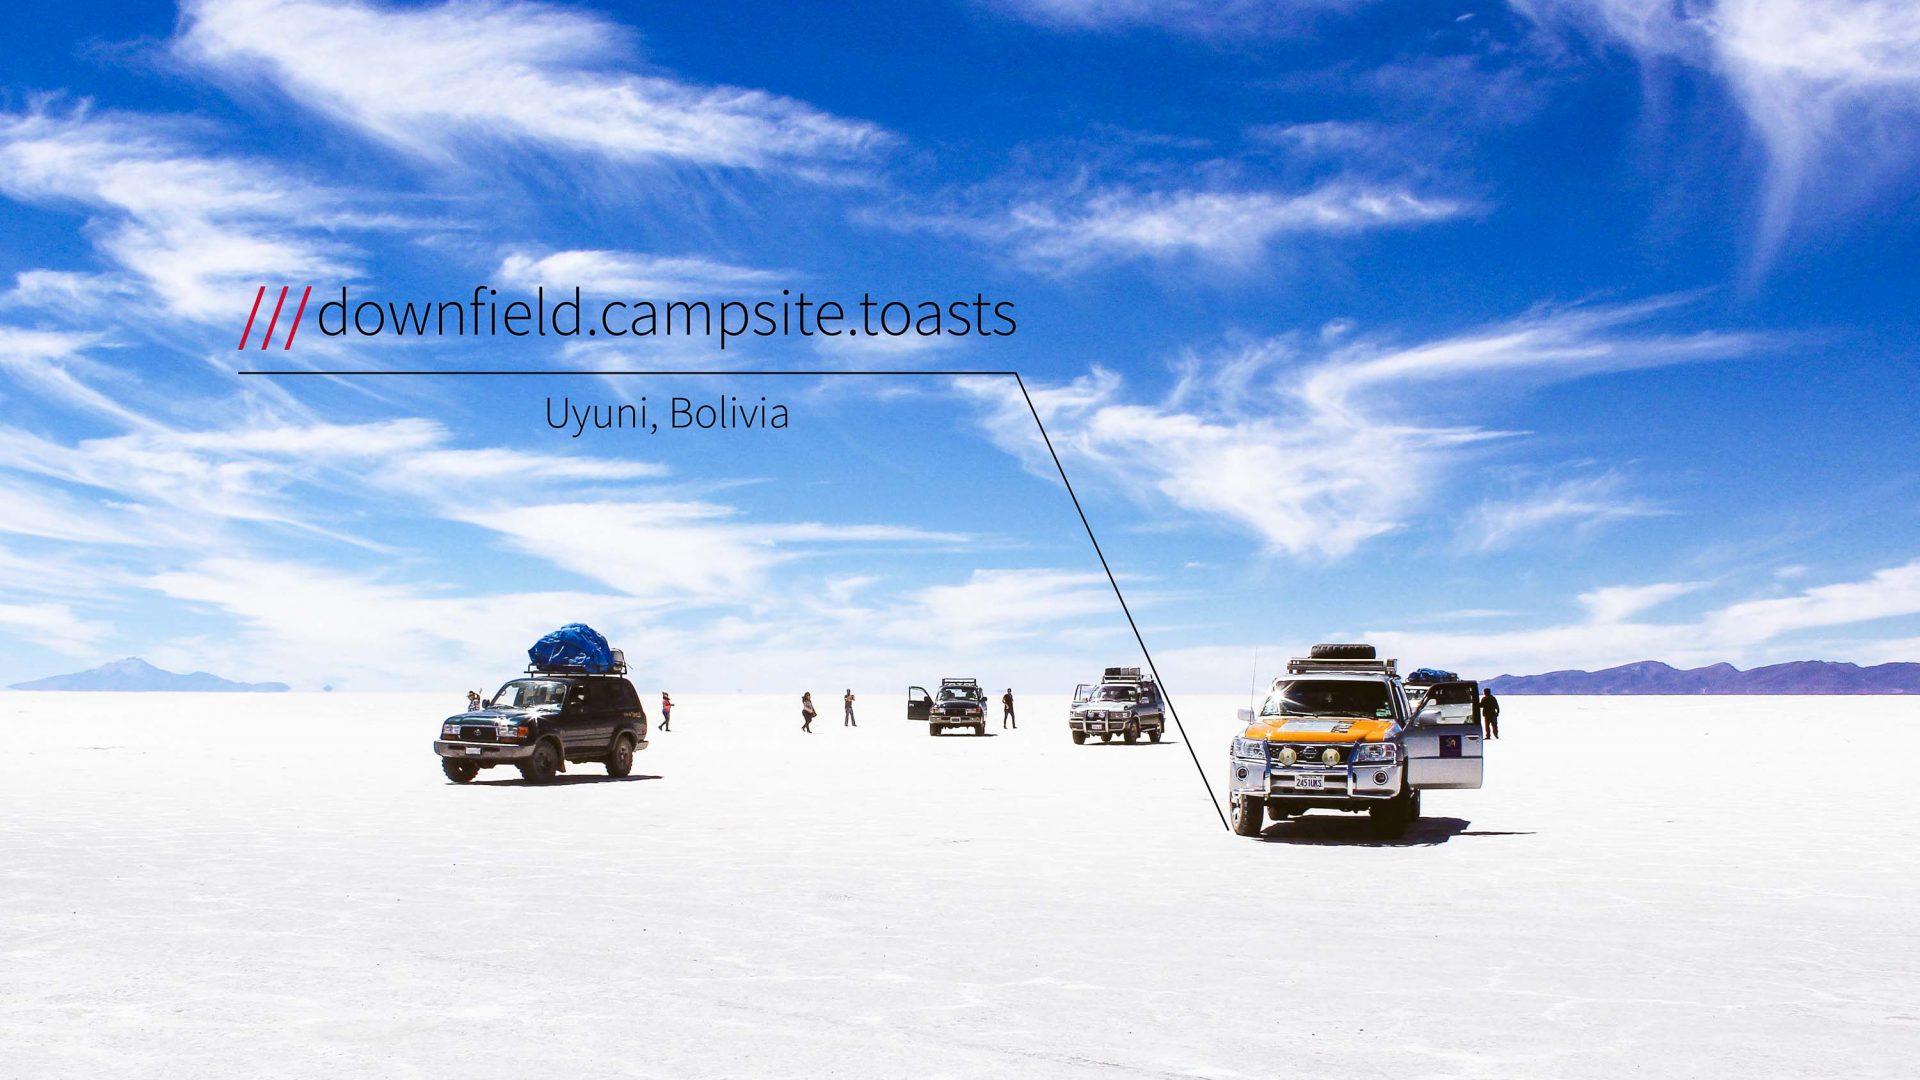 what3words is able to provide the address for these jeeps in the middle of Bolivia's salt plains.